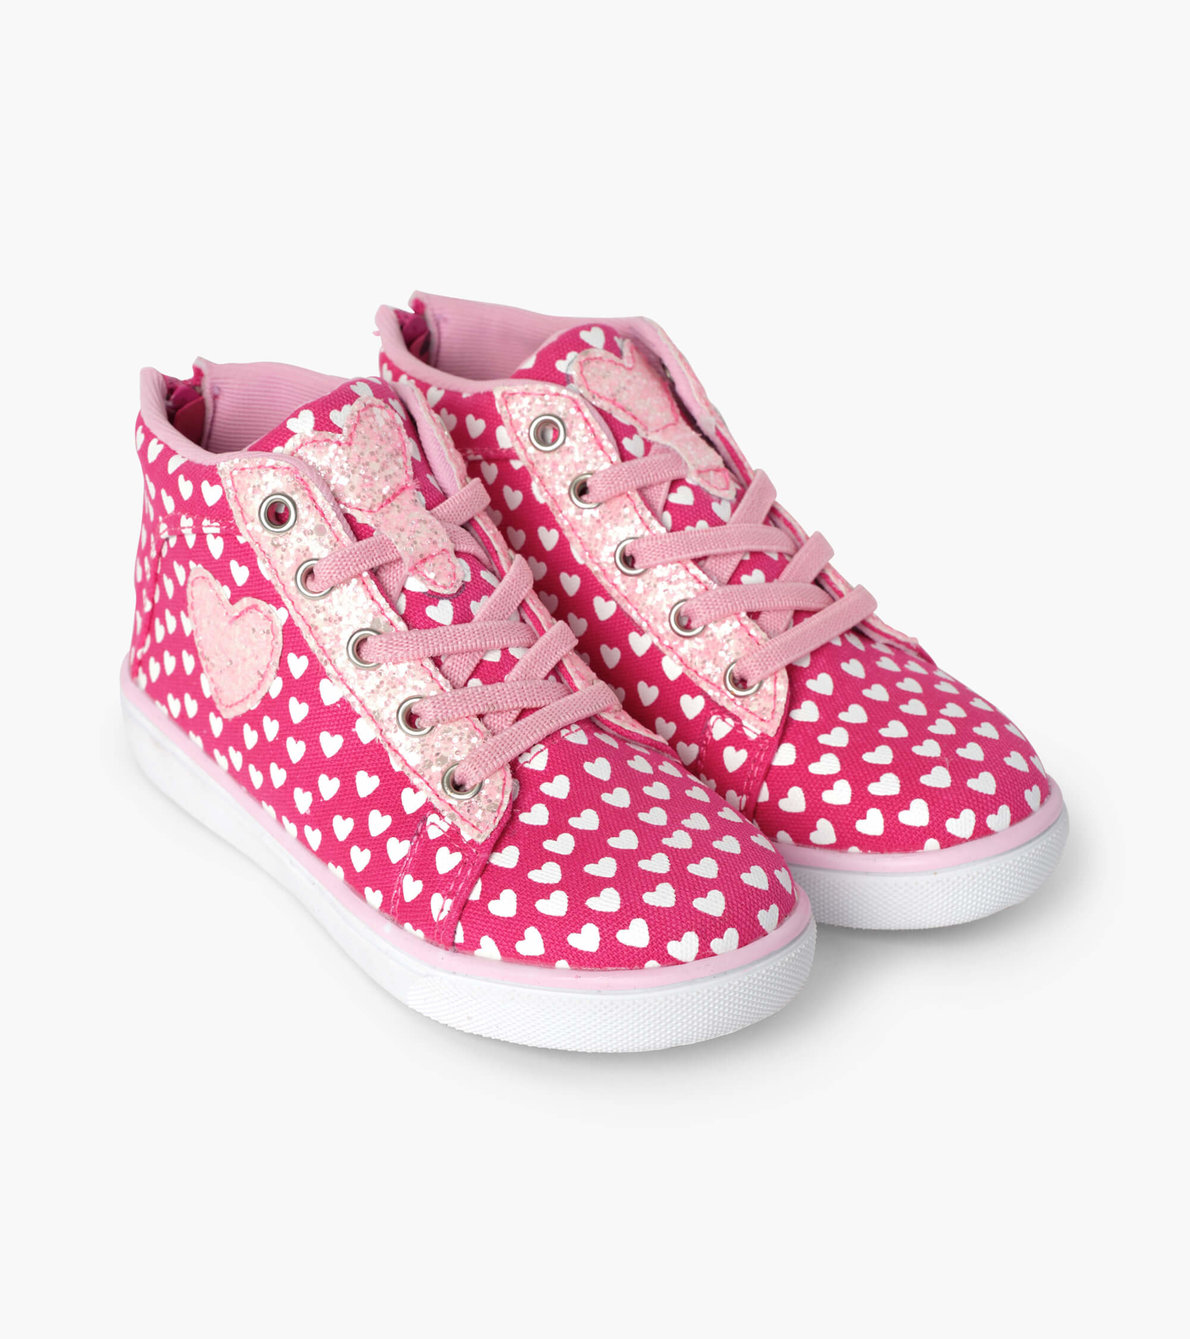 View larger image of Lots Of Hearts High Top Sneakers